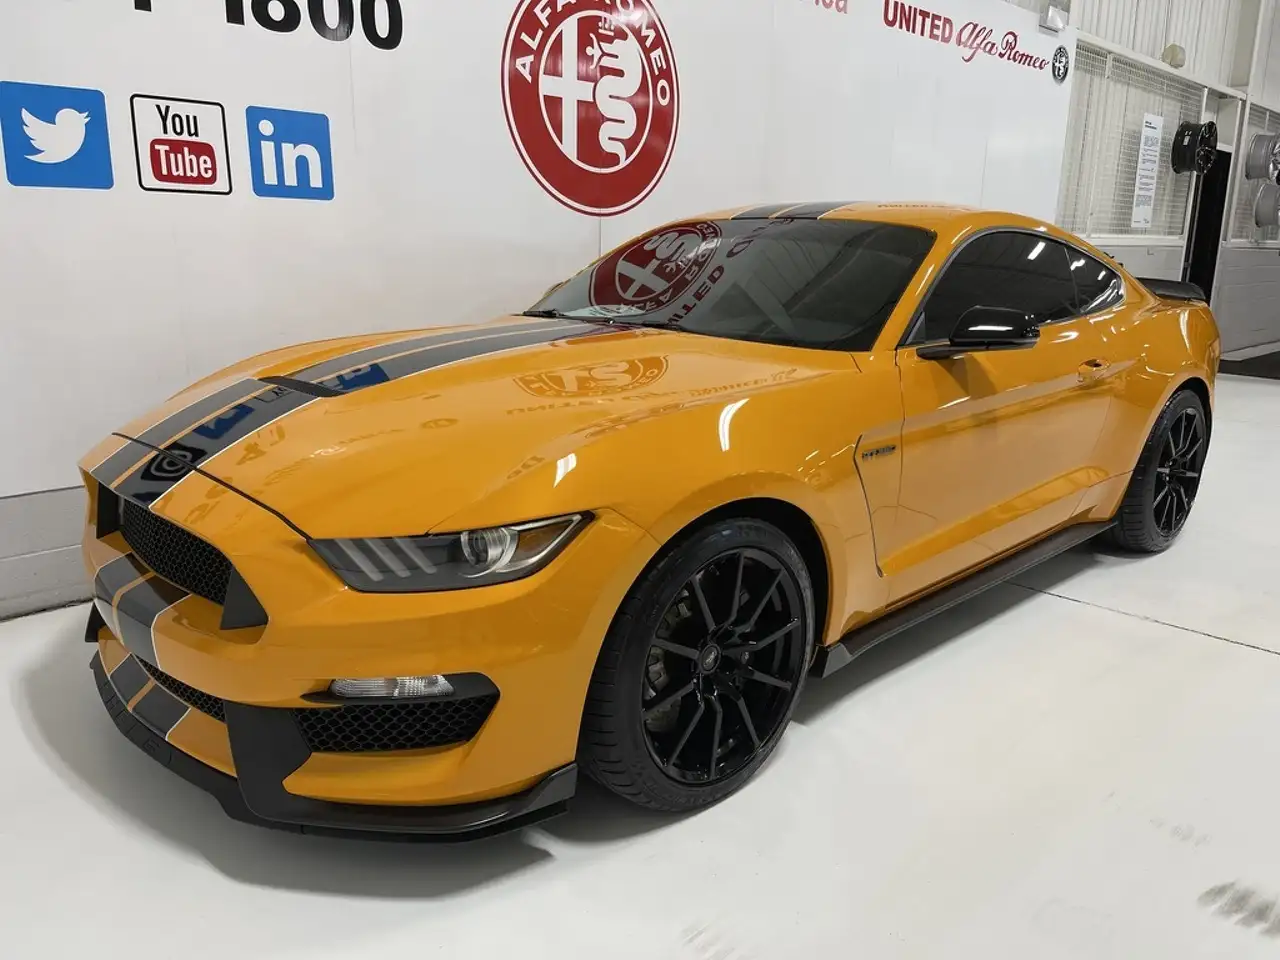 2018 - Ford Mustang Mustang Boîte manuelle Coupé